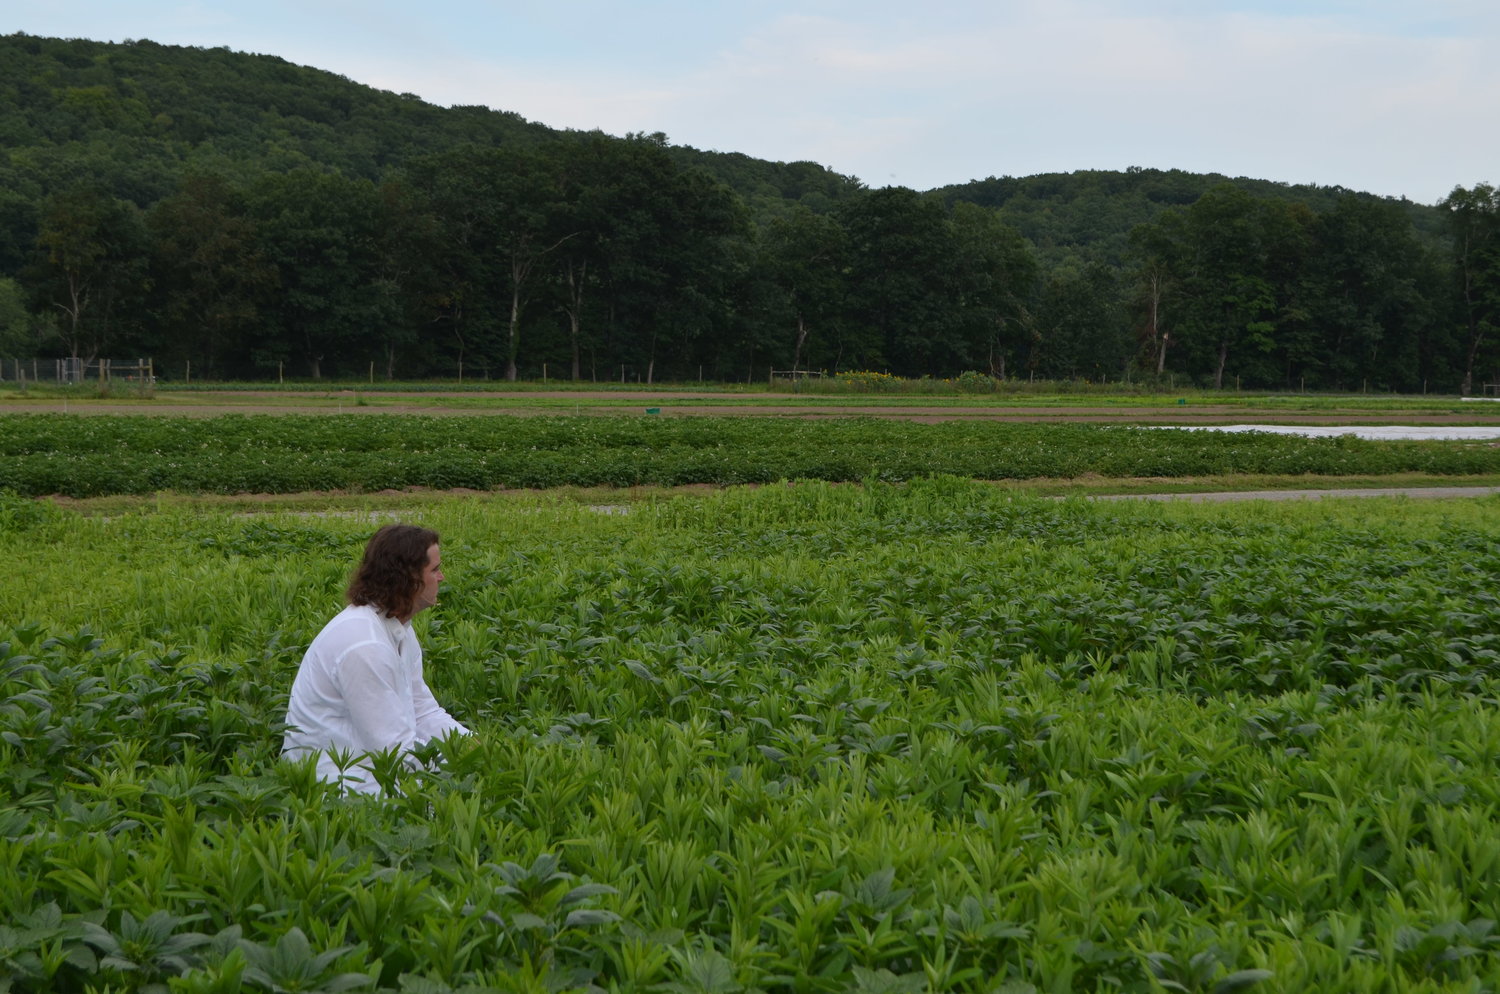 Carl Sagan (played by Hudson Williams-Eynon) looks out across the gorgeous landscape of Willow Wisp Organic Farm.